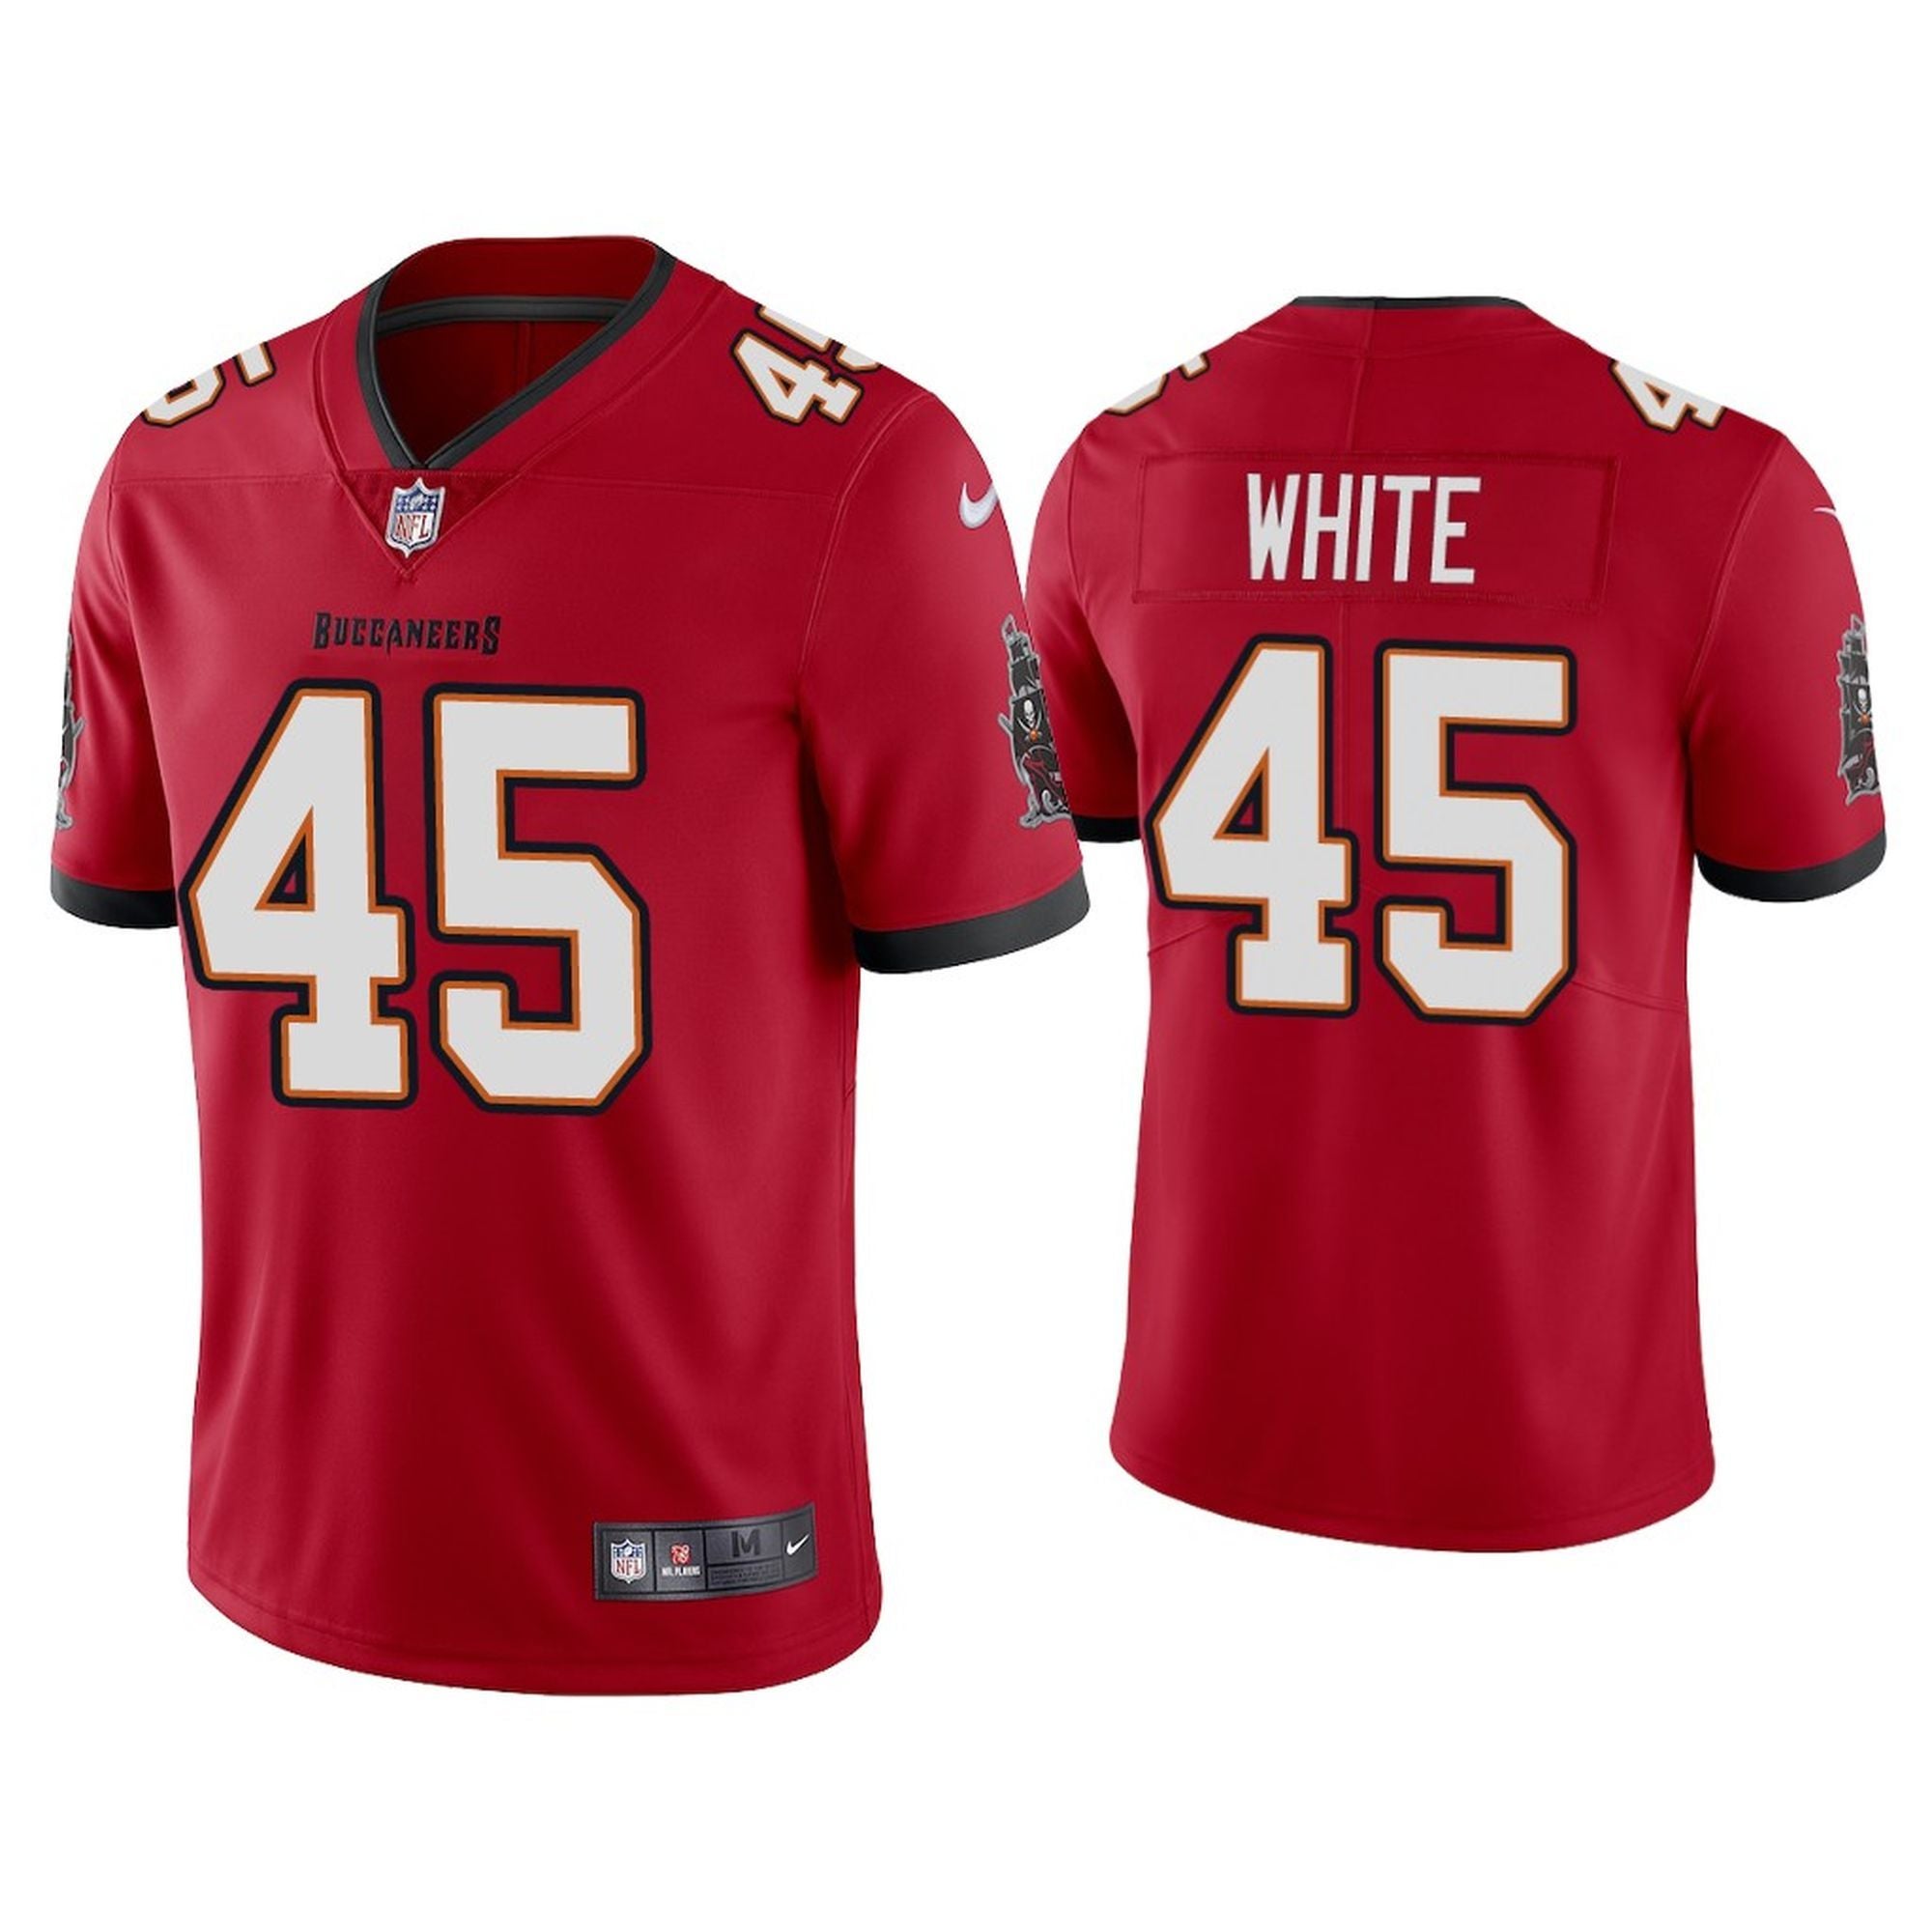 Devin White Tampa Bay Buccaneers Men's Nike Dri-FIT NFL Limited Football  Jersey